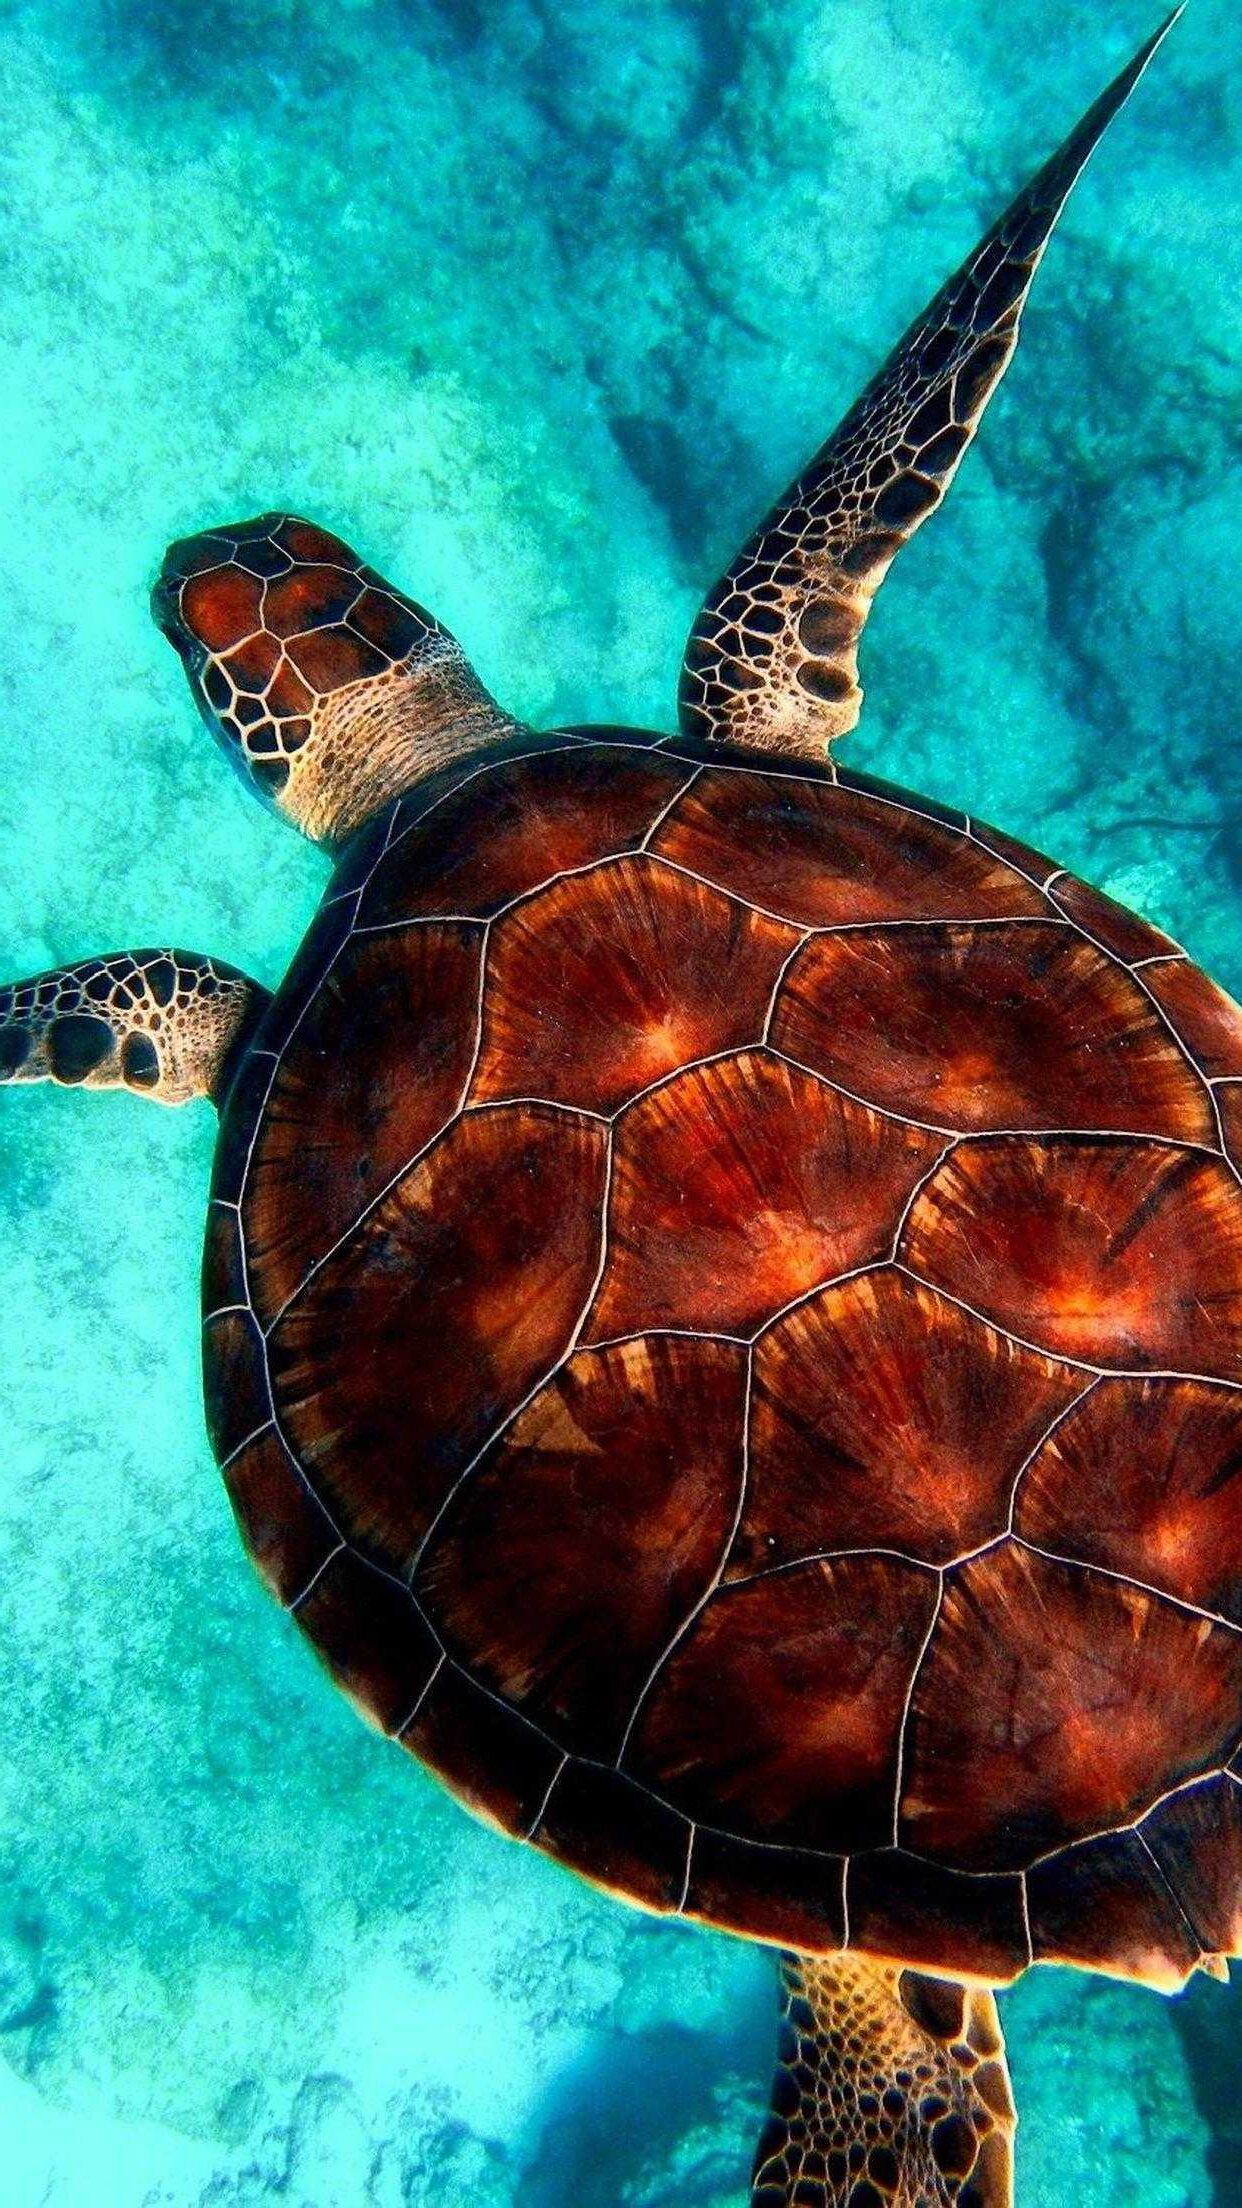 A turtle swims in the clear blue waters - Turtle